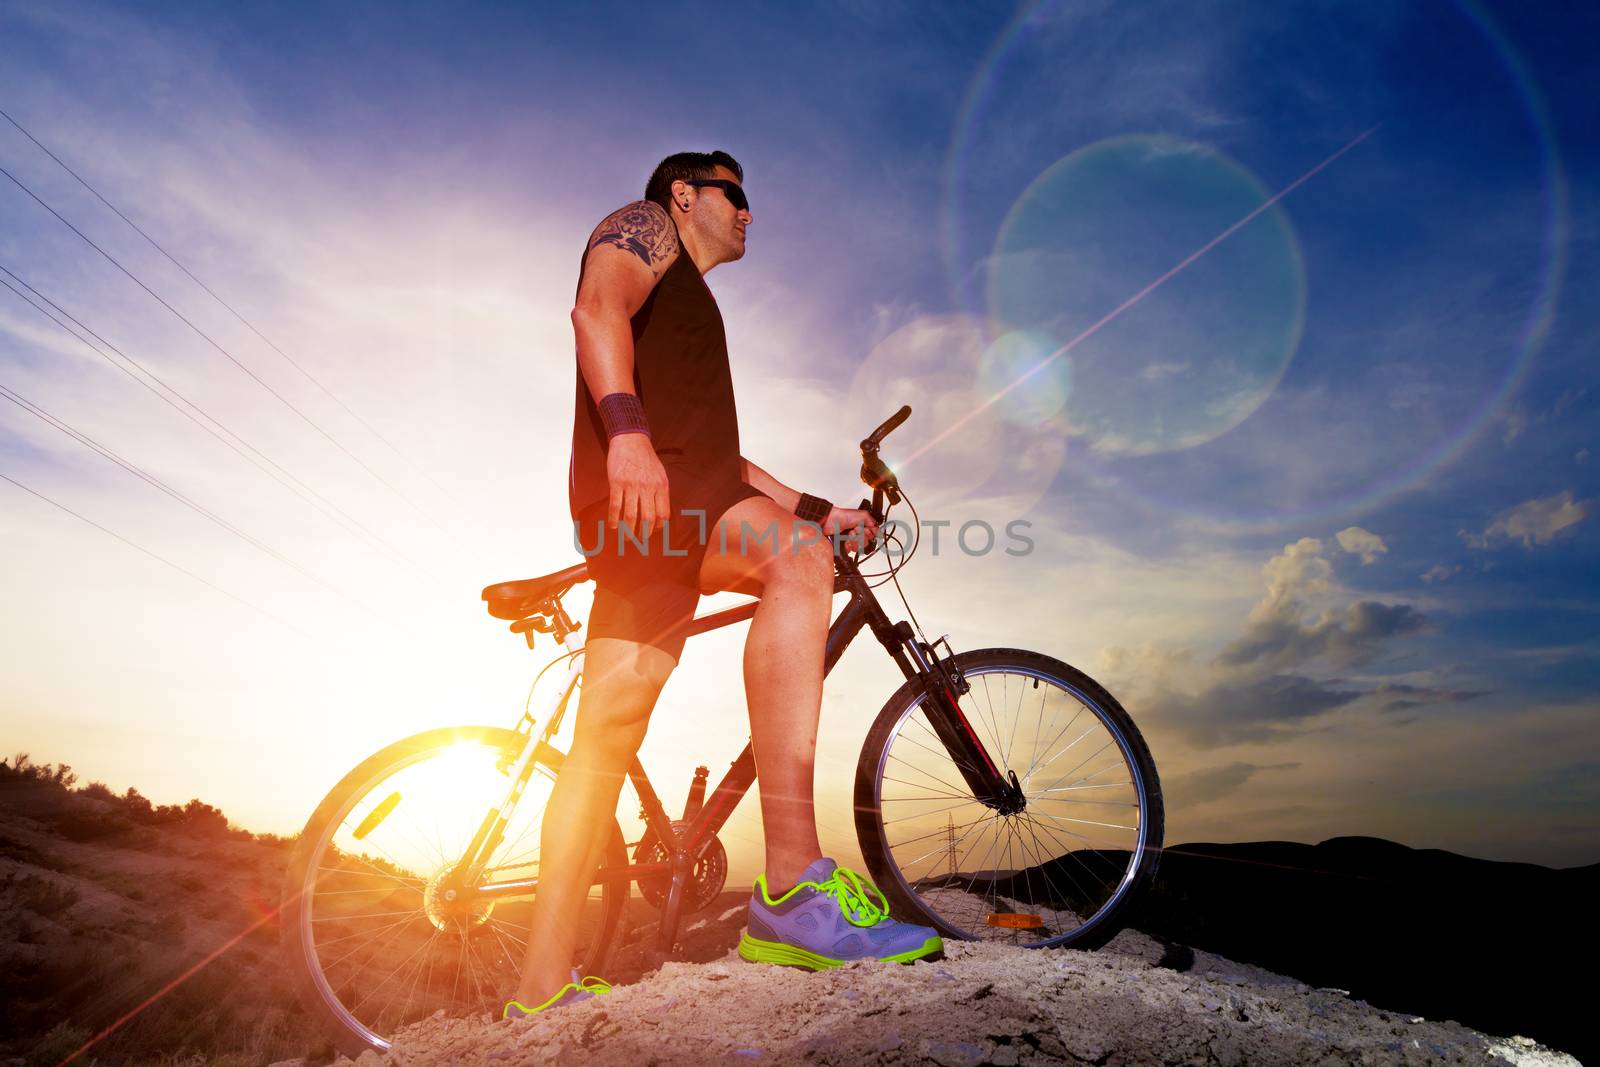 Sport and healthy life.Mountain bike and landscape background by carloscastilla